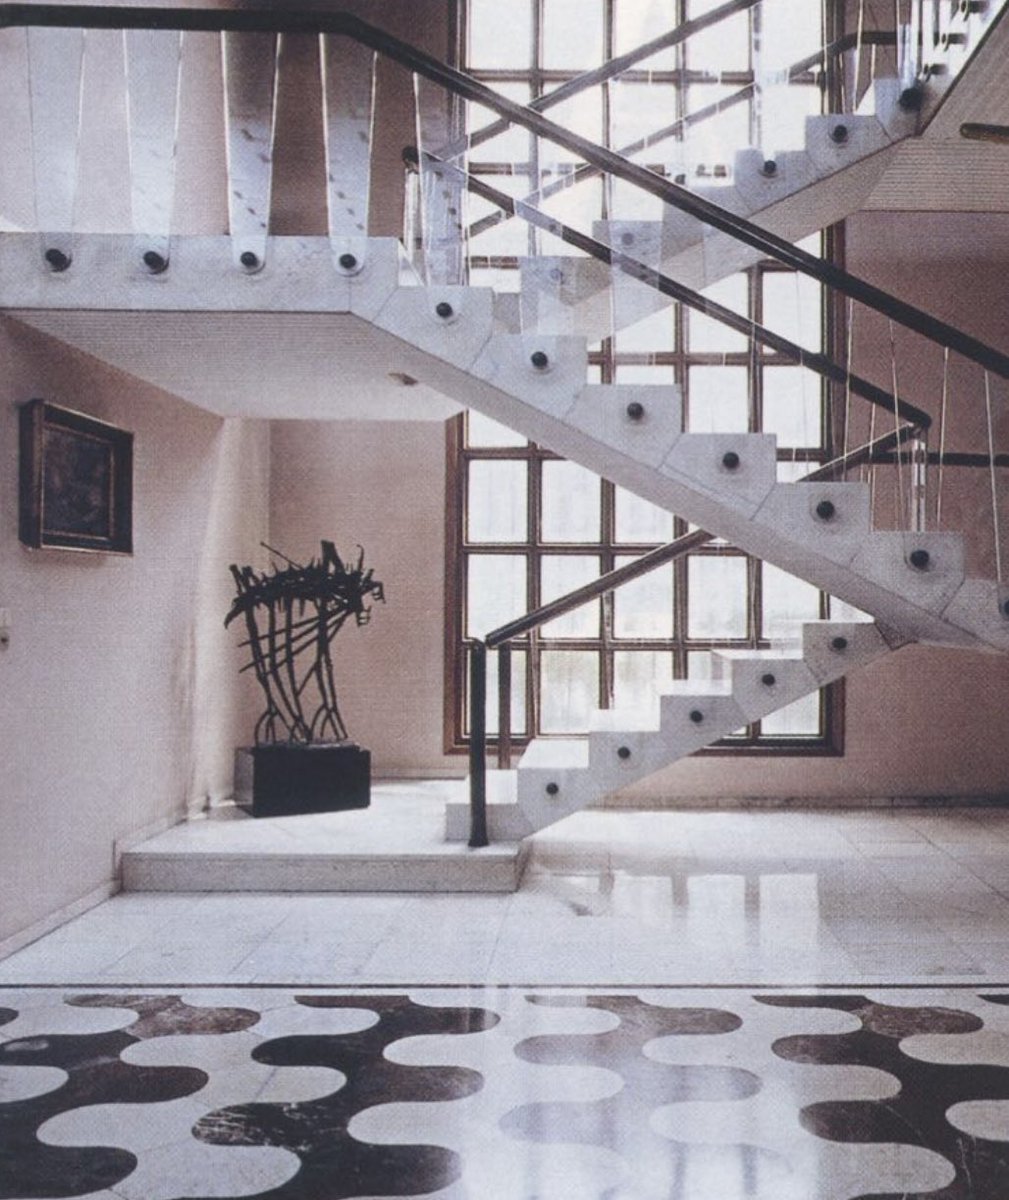 You know I love a good foyer so make a wise choice!